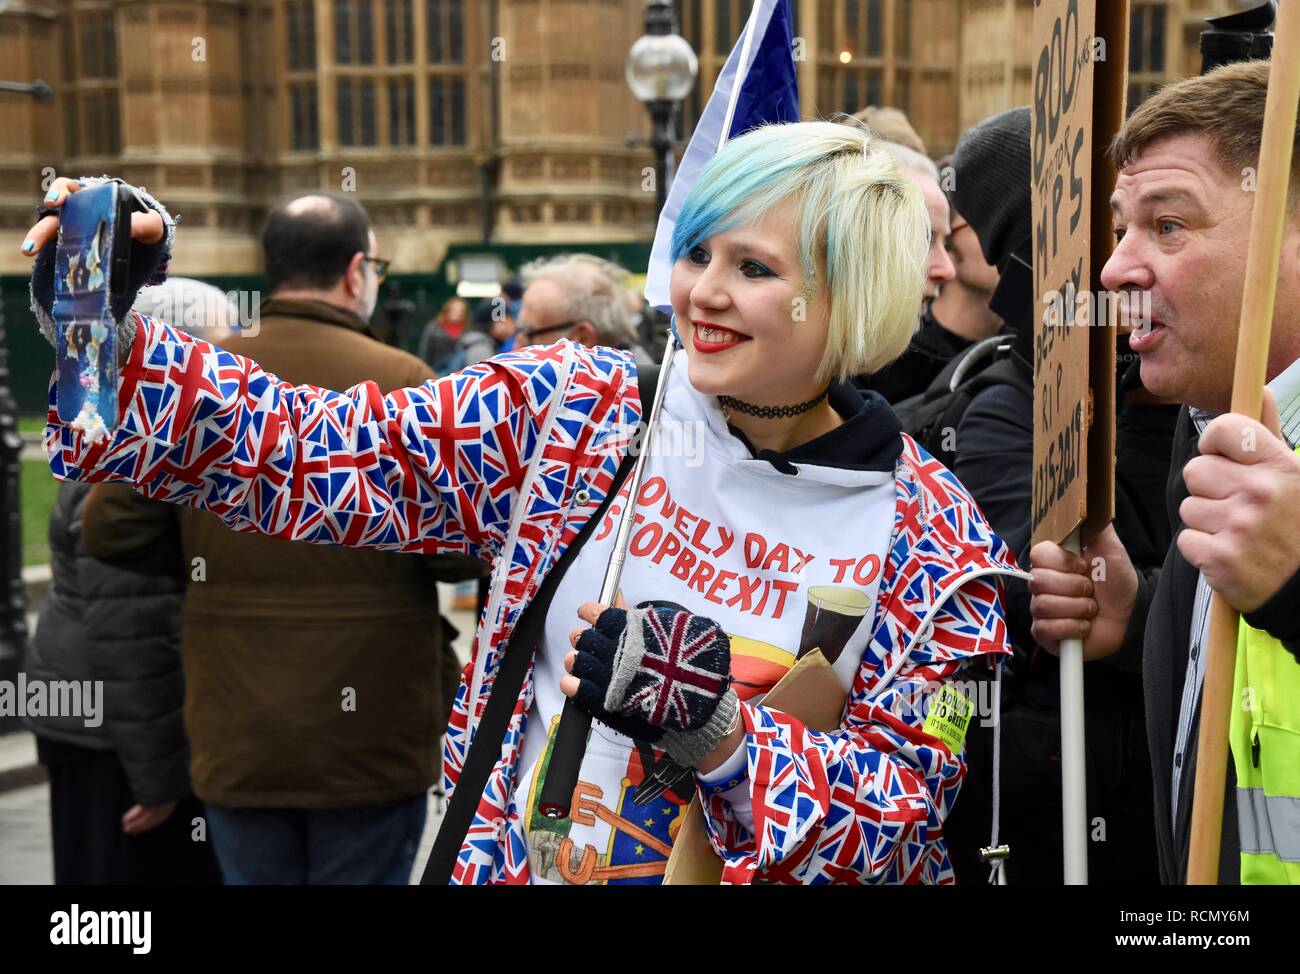 Madeleine Kay (Alba White Wolf) Pro EU Remainer with Brexiteer demonstrator, Pro and Anti Brexit protesters gathered outside Parliament on the day of Theresa May's meaningful vote. House of Parliament, Westminster, London. UK Stock Photo